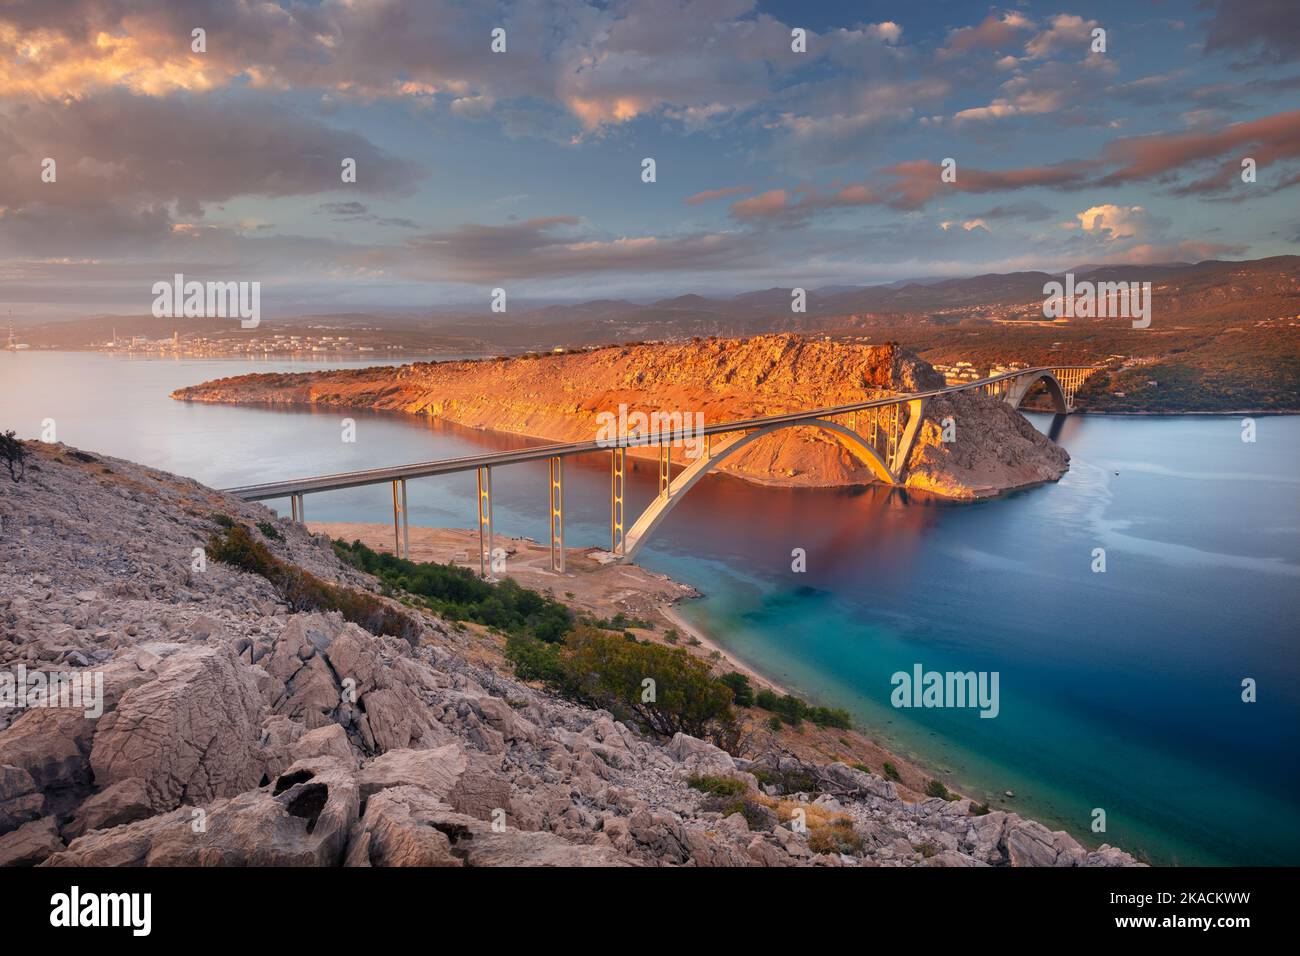 Krk Bridge, Croatia. Image of Krk Bridge which connects the Croatian island of Krk with the mainland at beautiful summer sunset. Stock Photo